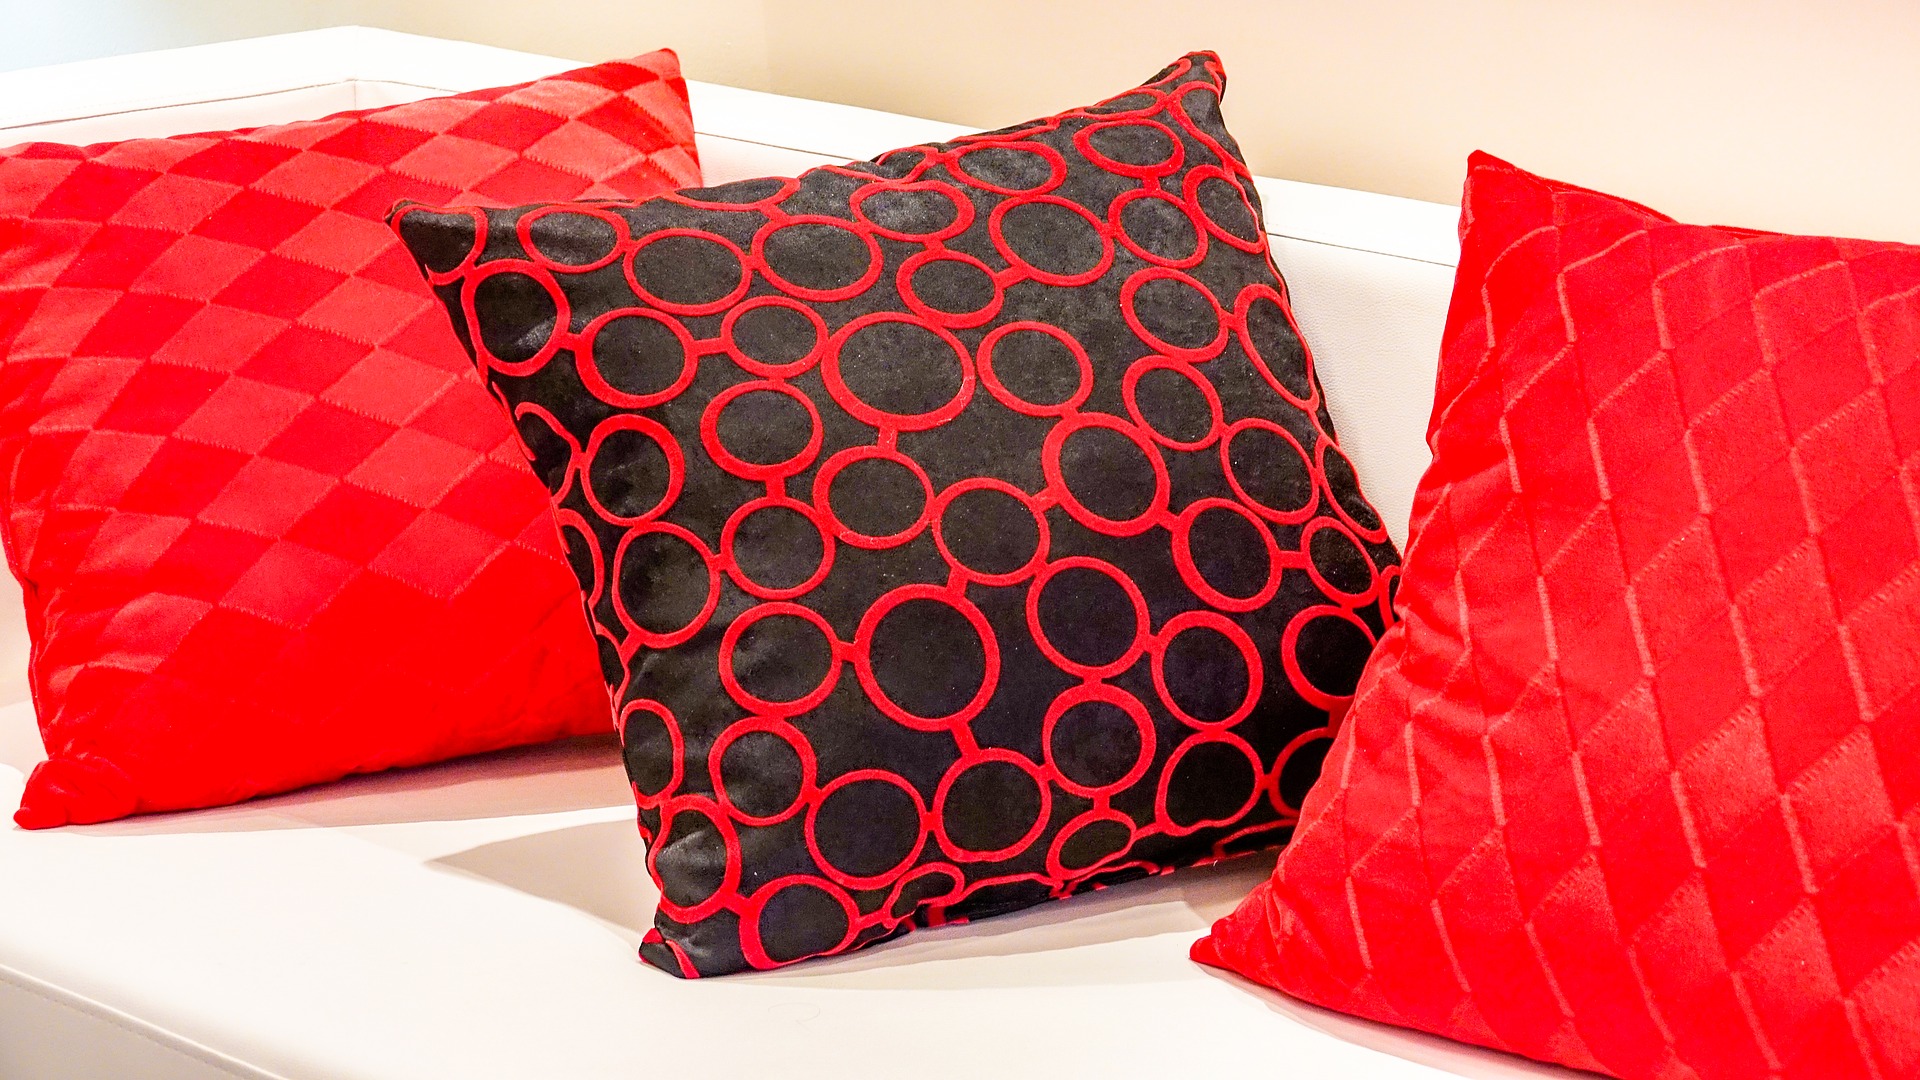 a red pillow on a white surface